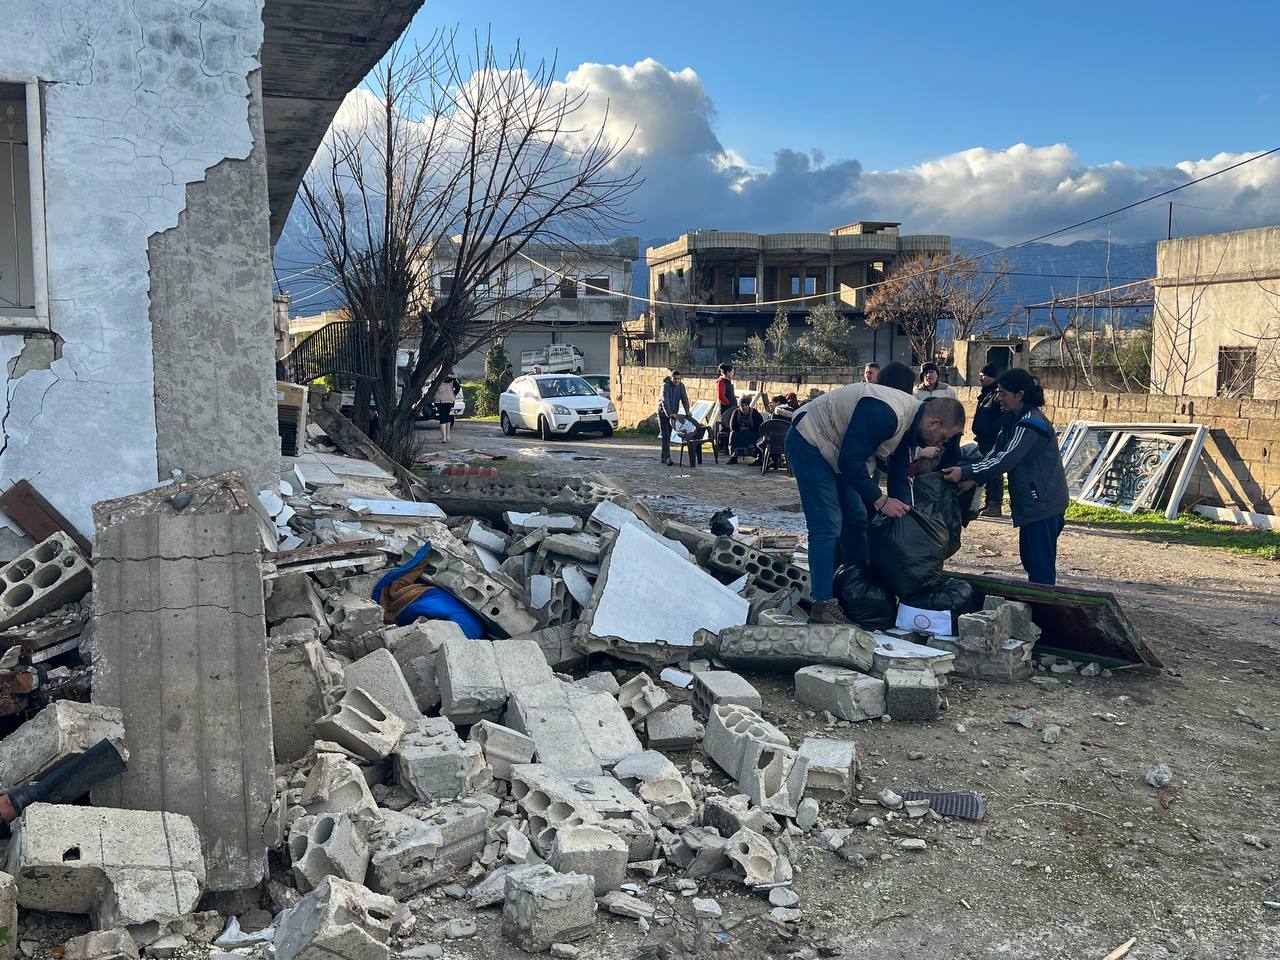 On the left, a crumbled building. On the right side of the building are two people picking up the rubble.